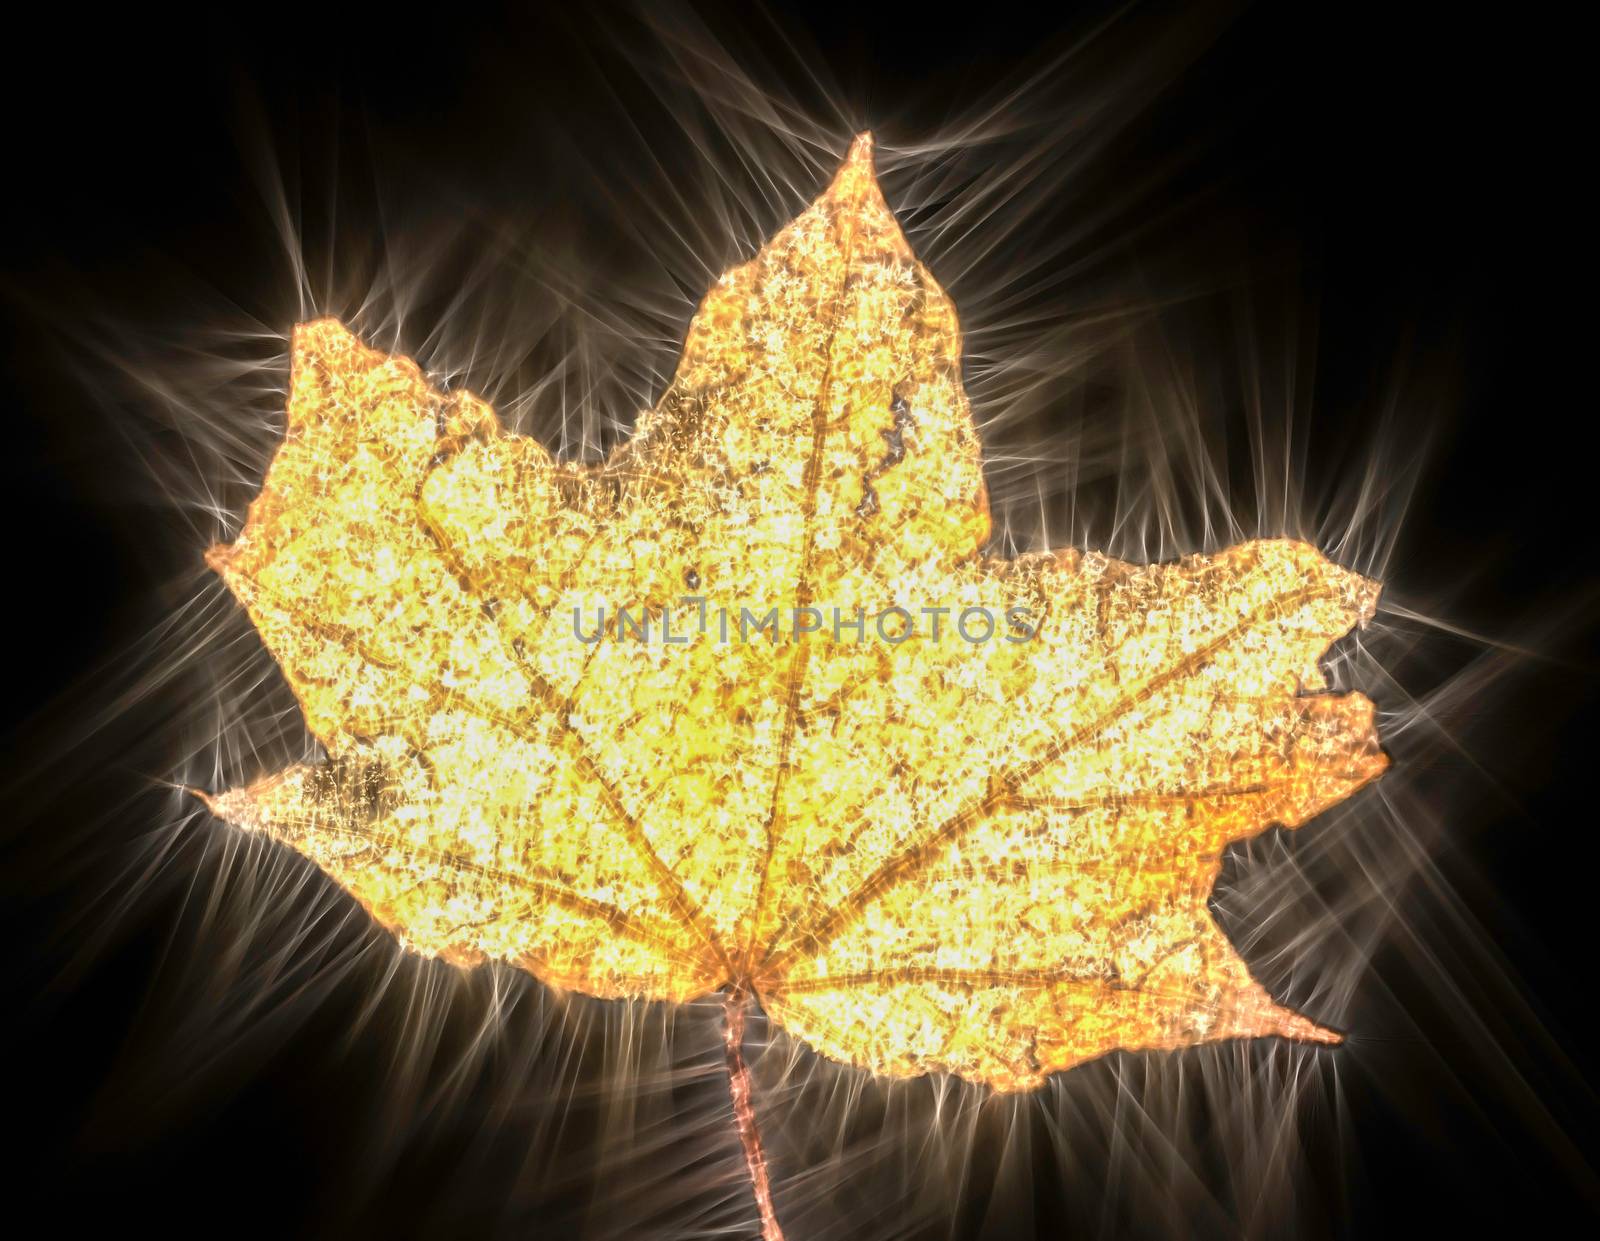 Kirlian glowing photography of beautiful autumn leaves showing a by MP_foto71